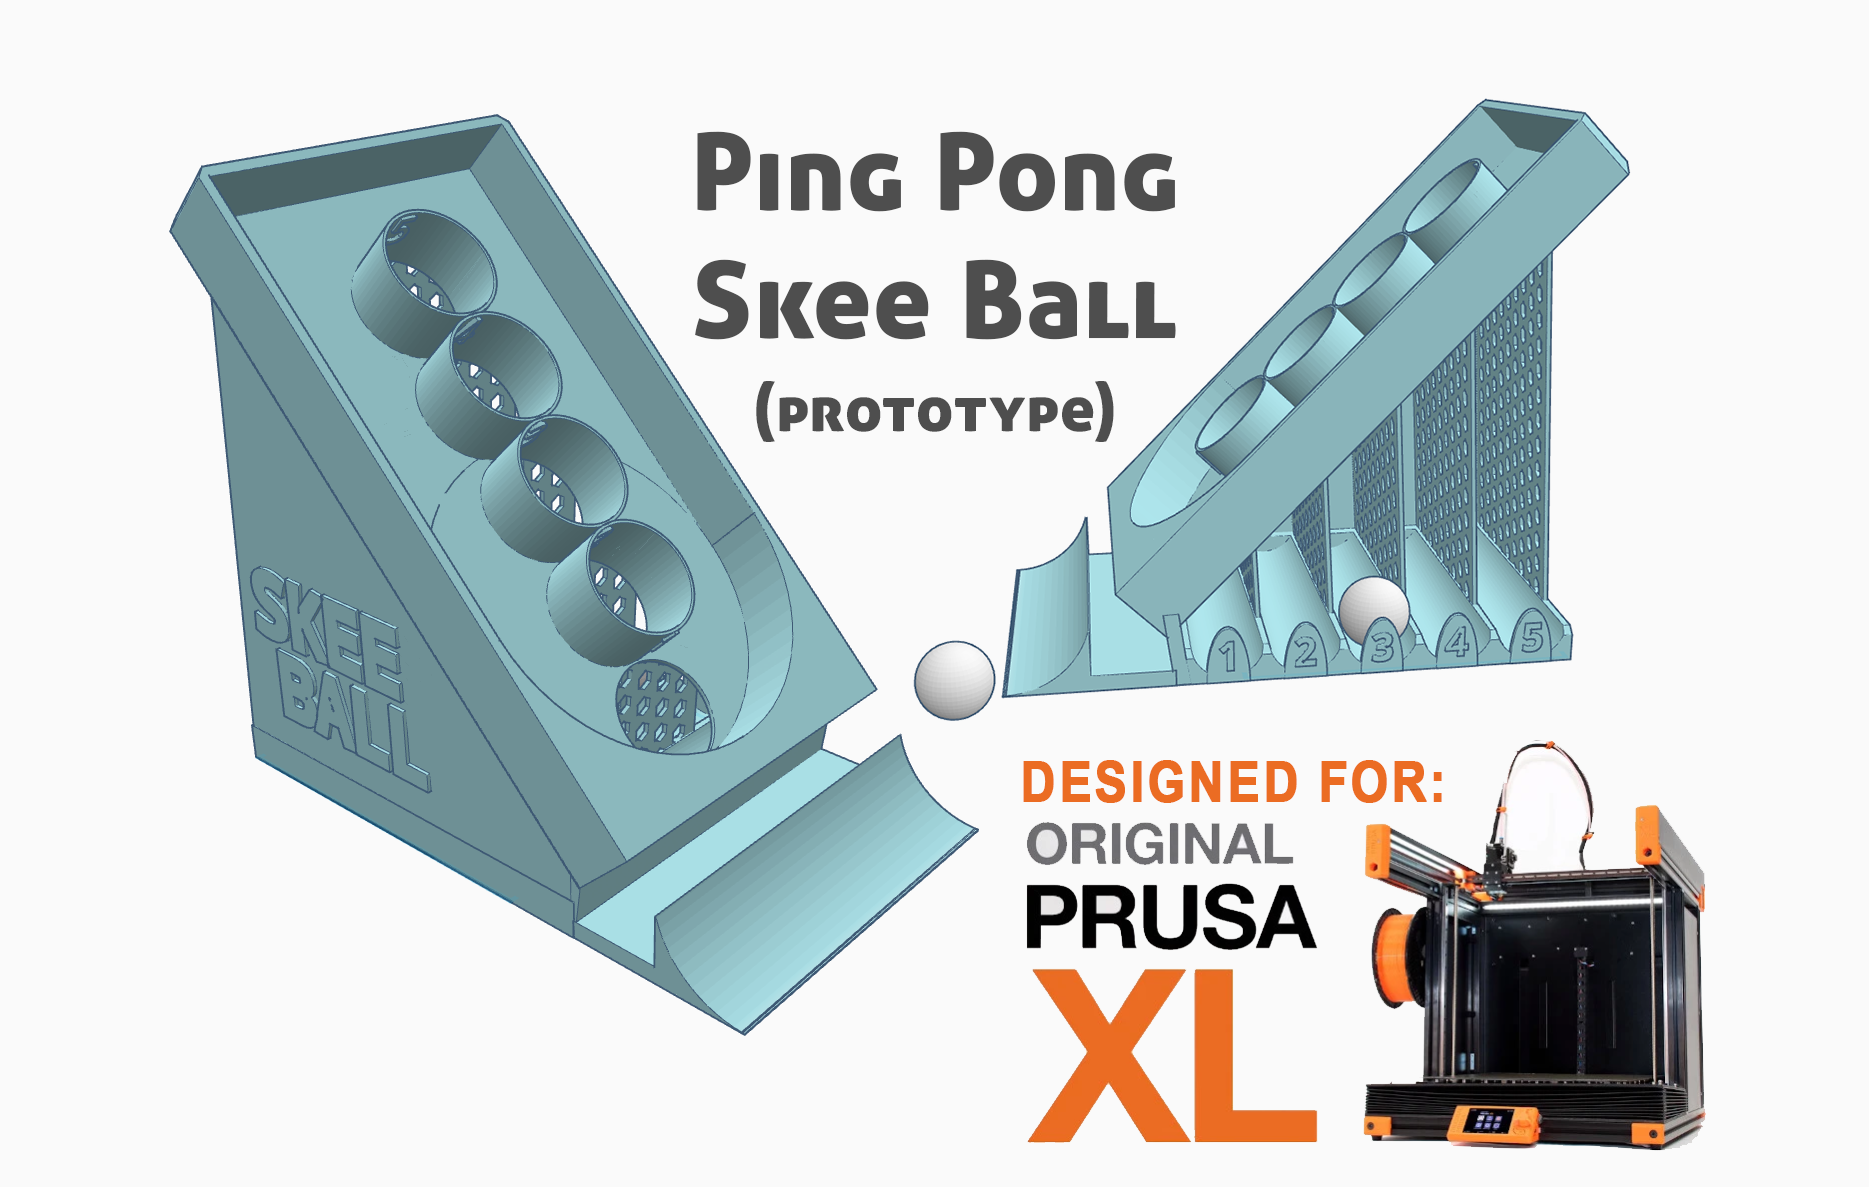 Ping Pong Skee Ball - For Prusa XL - Prototype